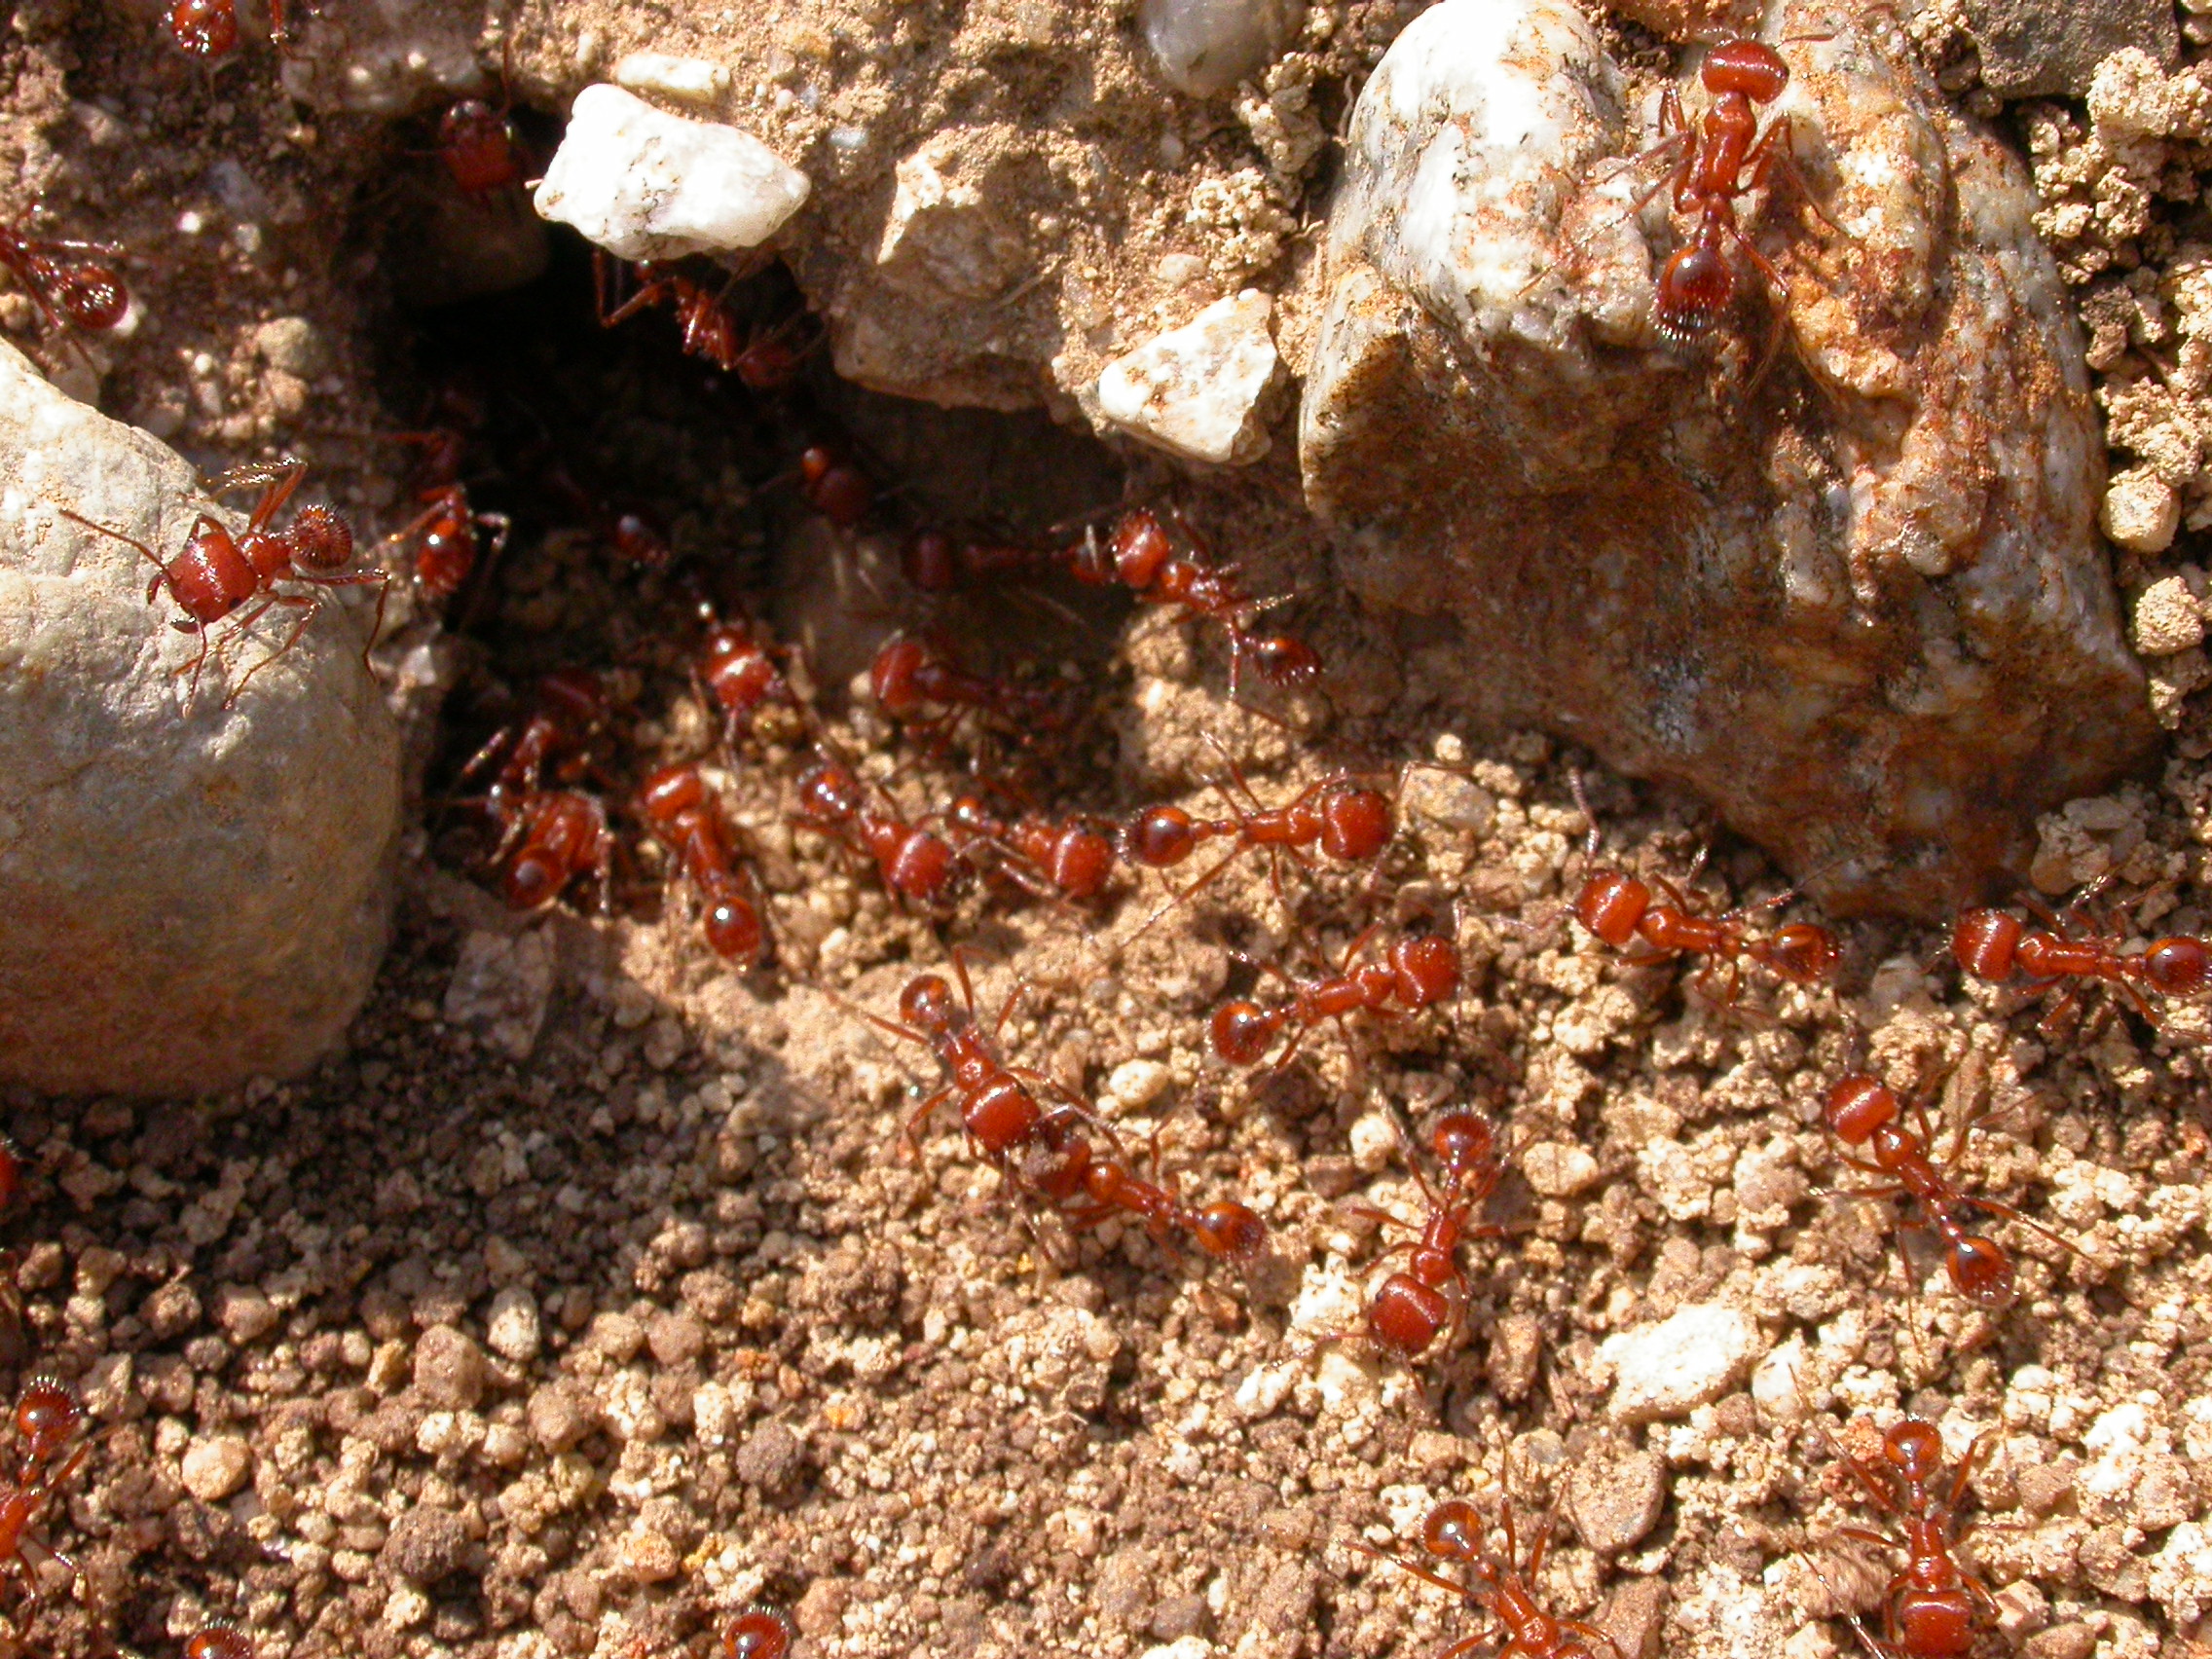 P. californicus ant colony. Retrieved from Wikimedia Commons.